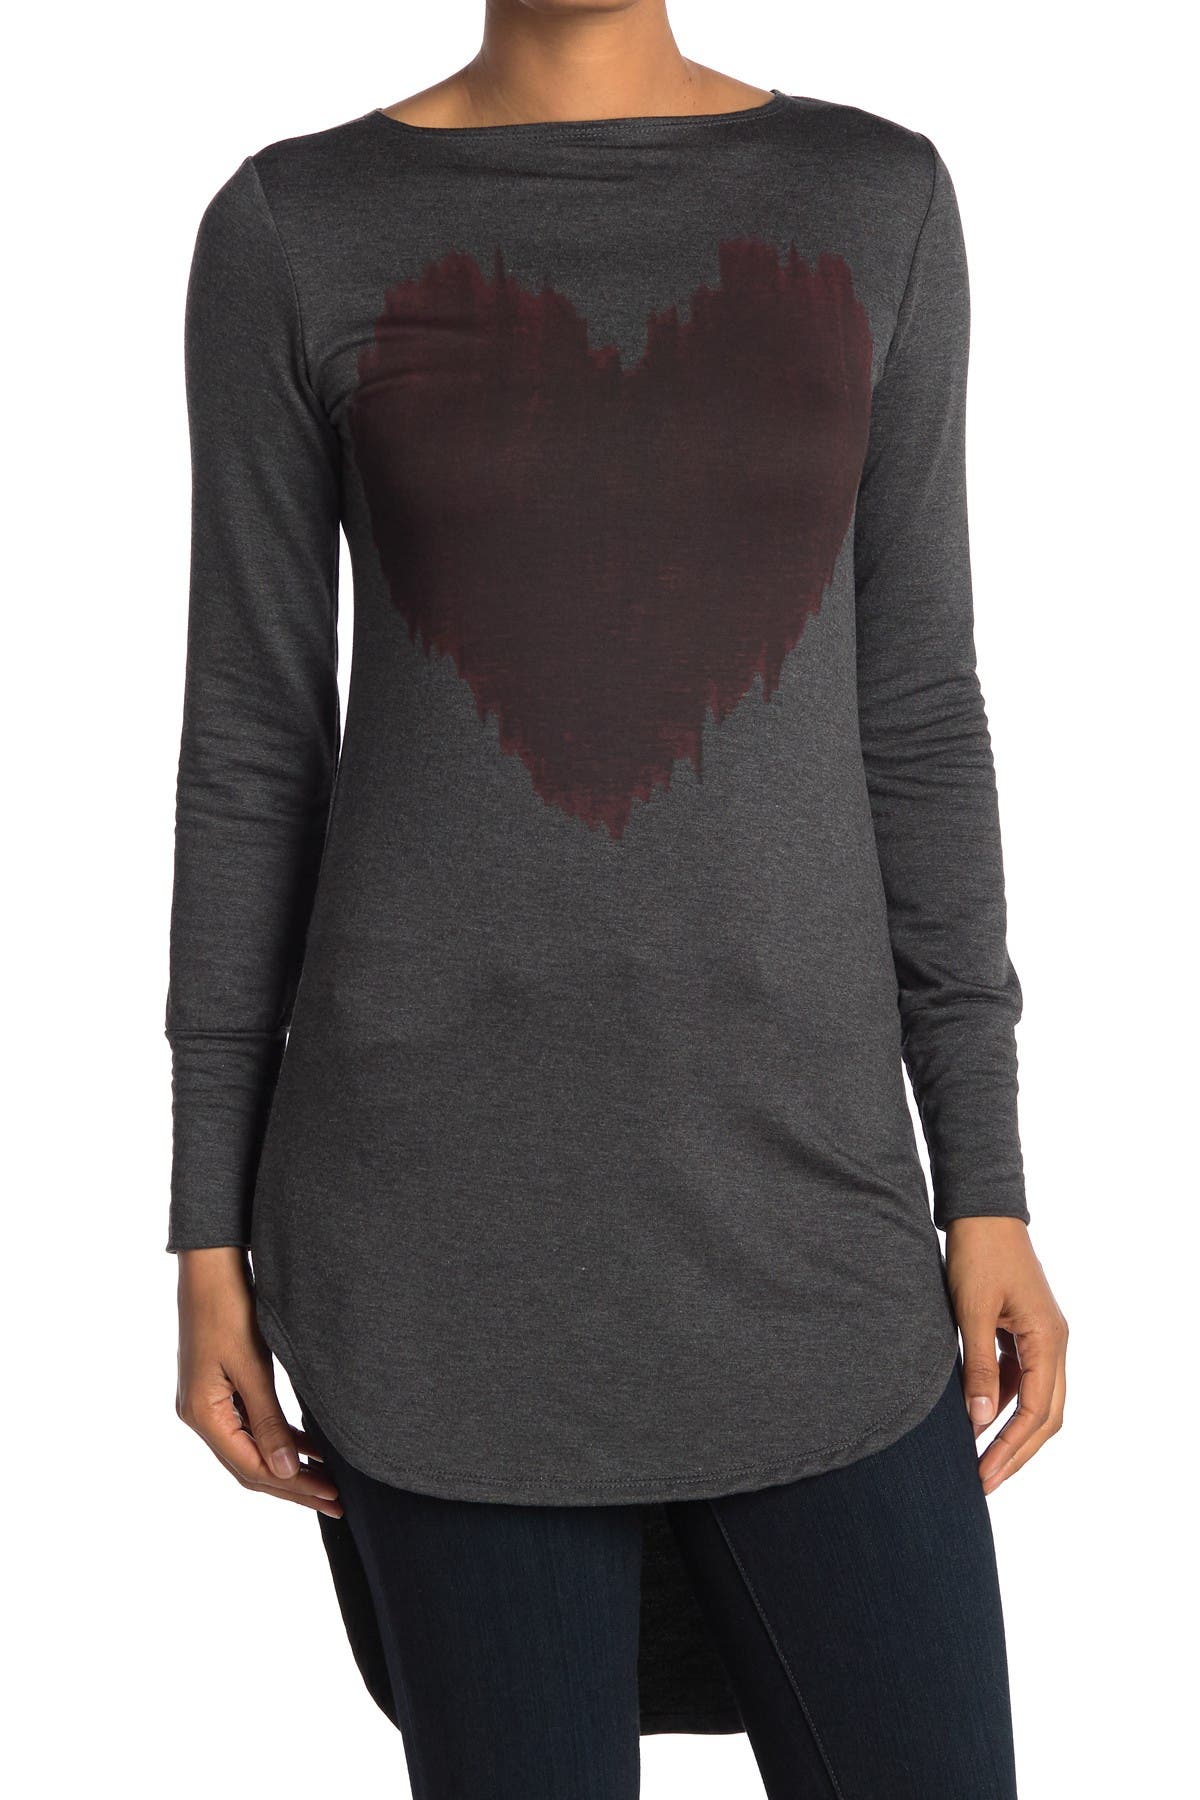 Go Couture Graphic Boatneck Top In Dark Grey2